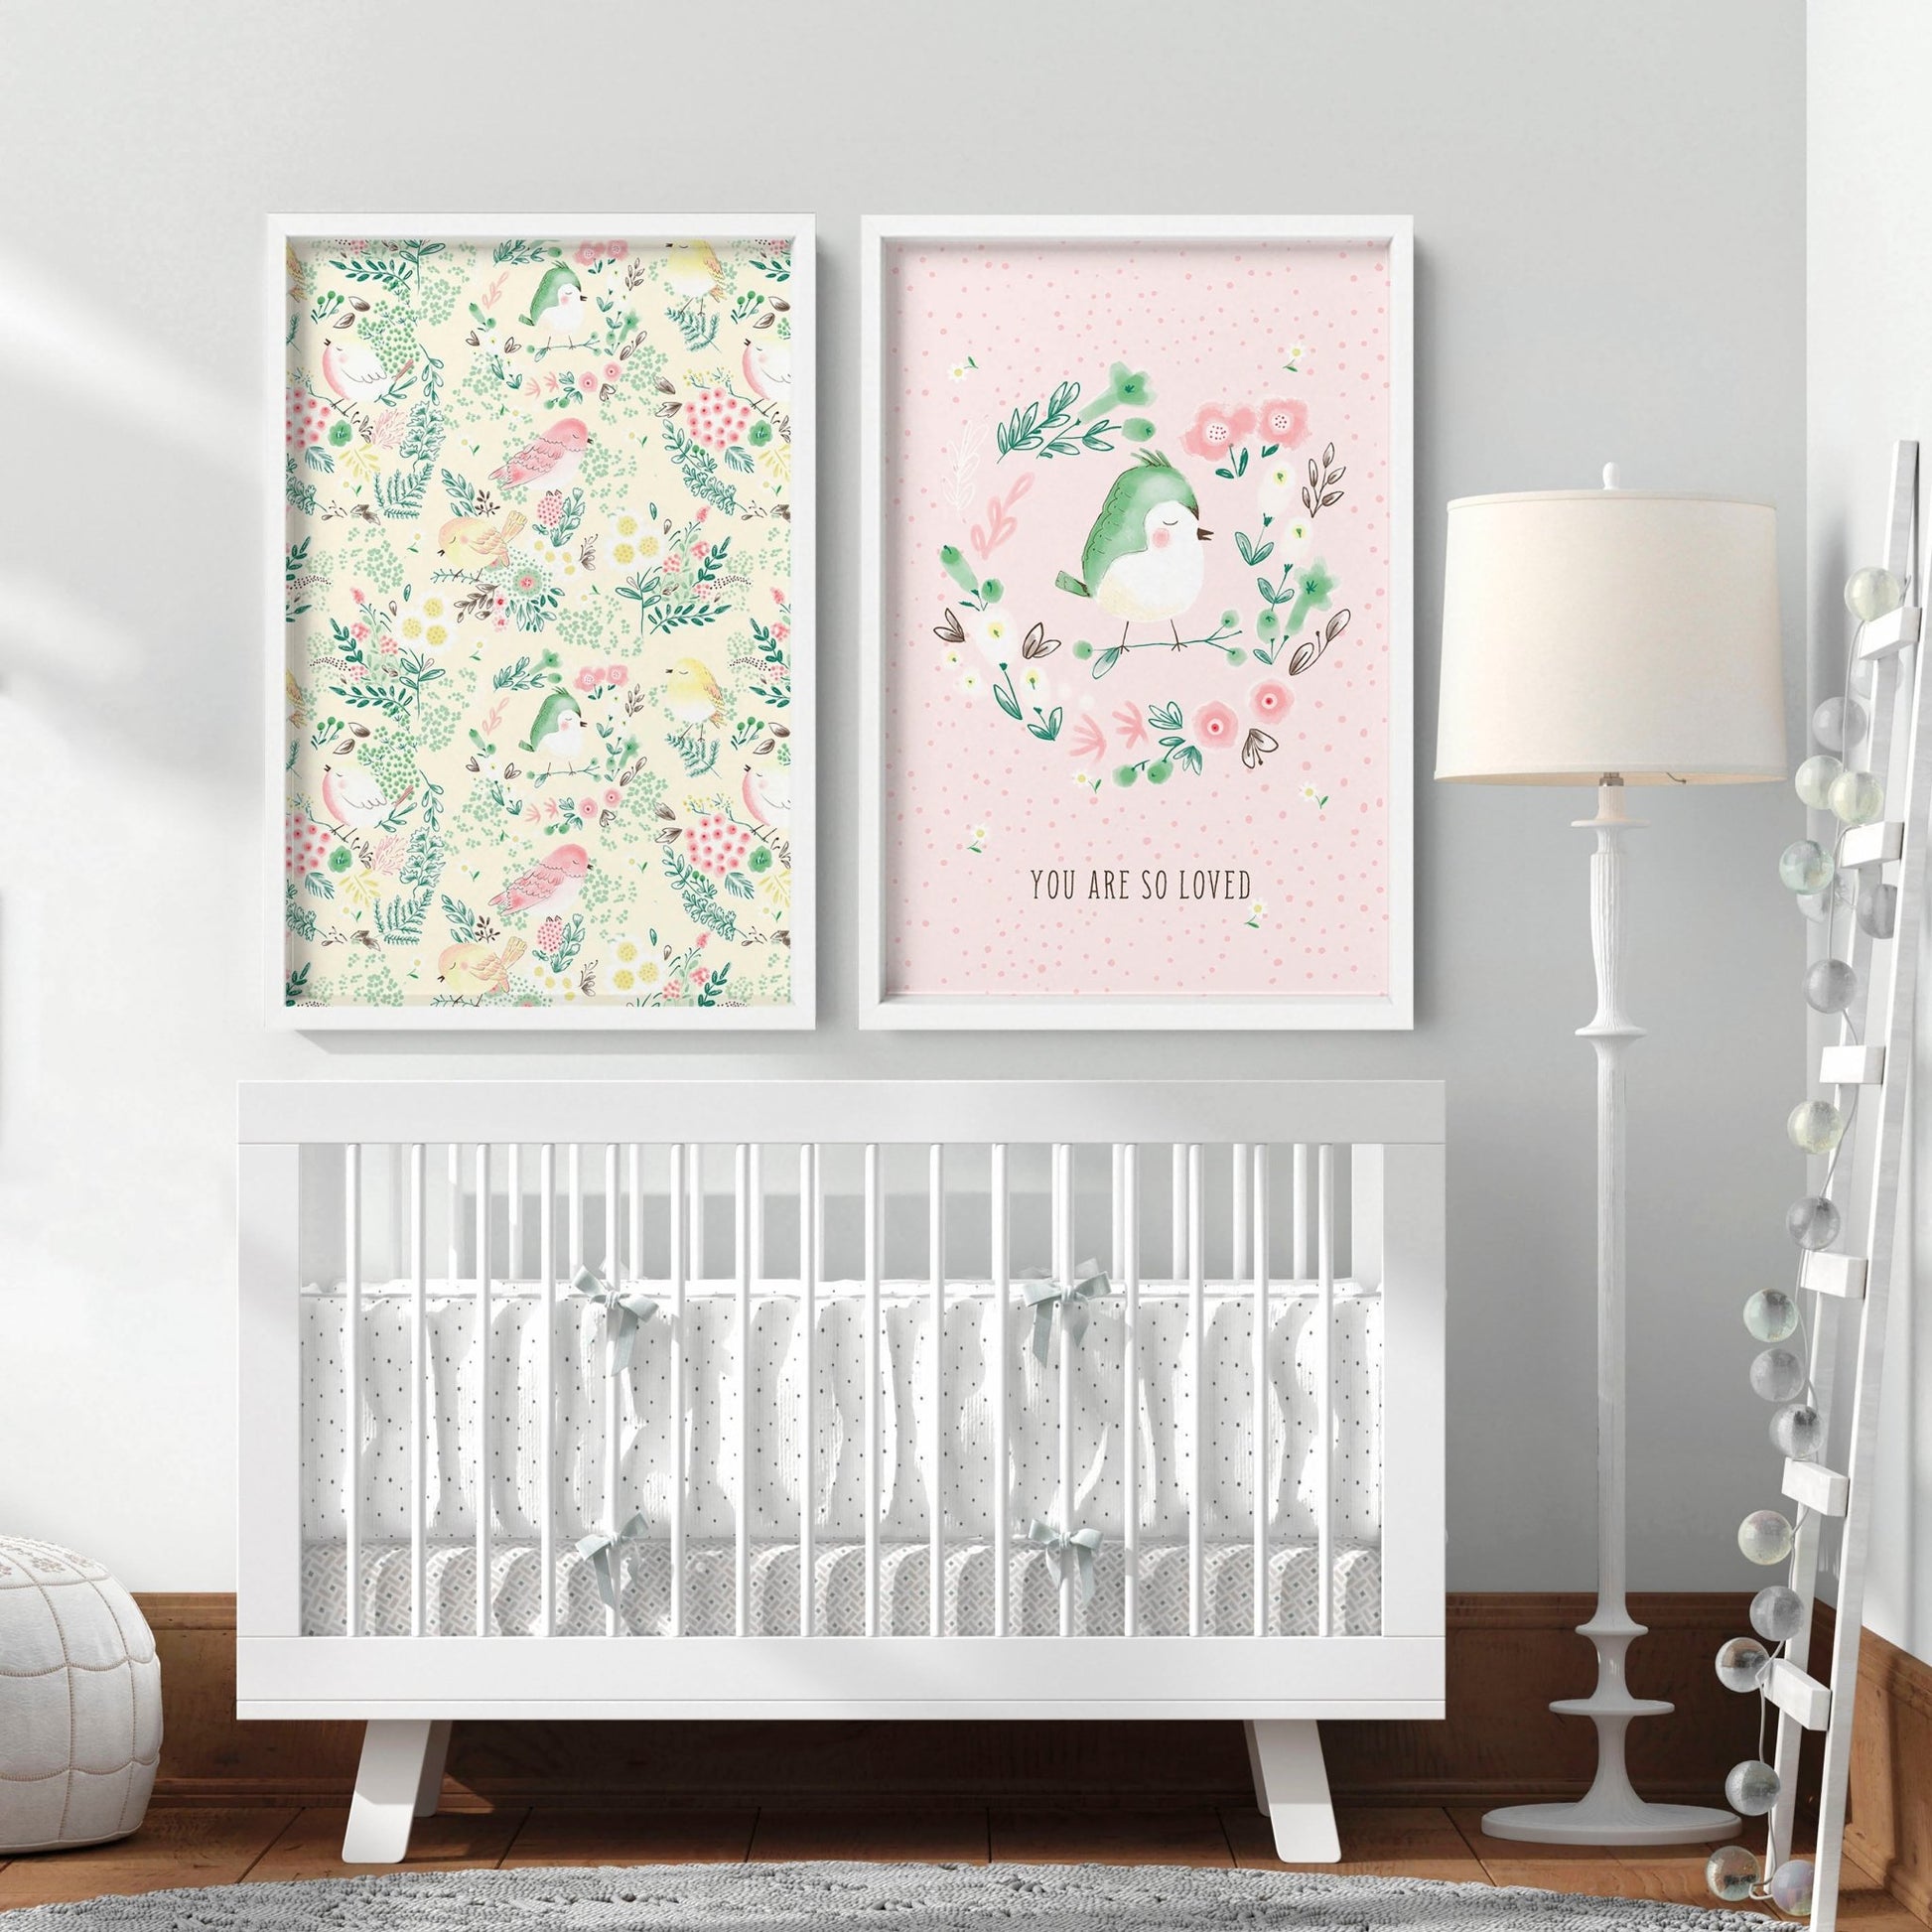 Cute pictures for nursery | set of 2 wall art prints - About Wall Art